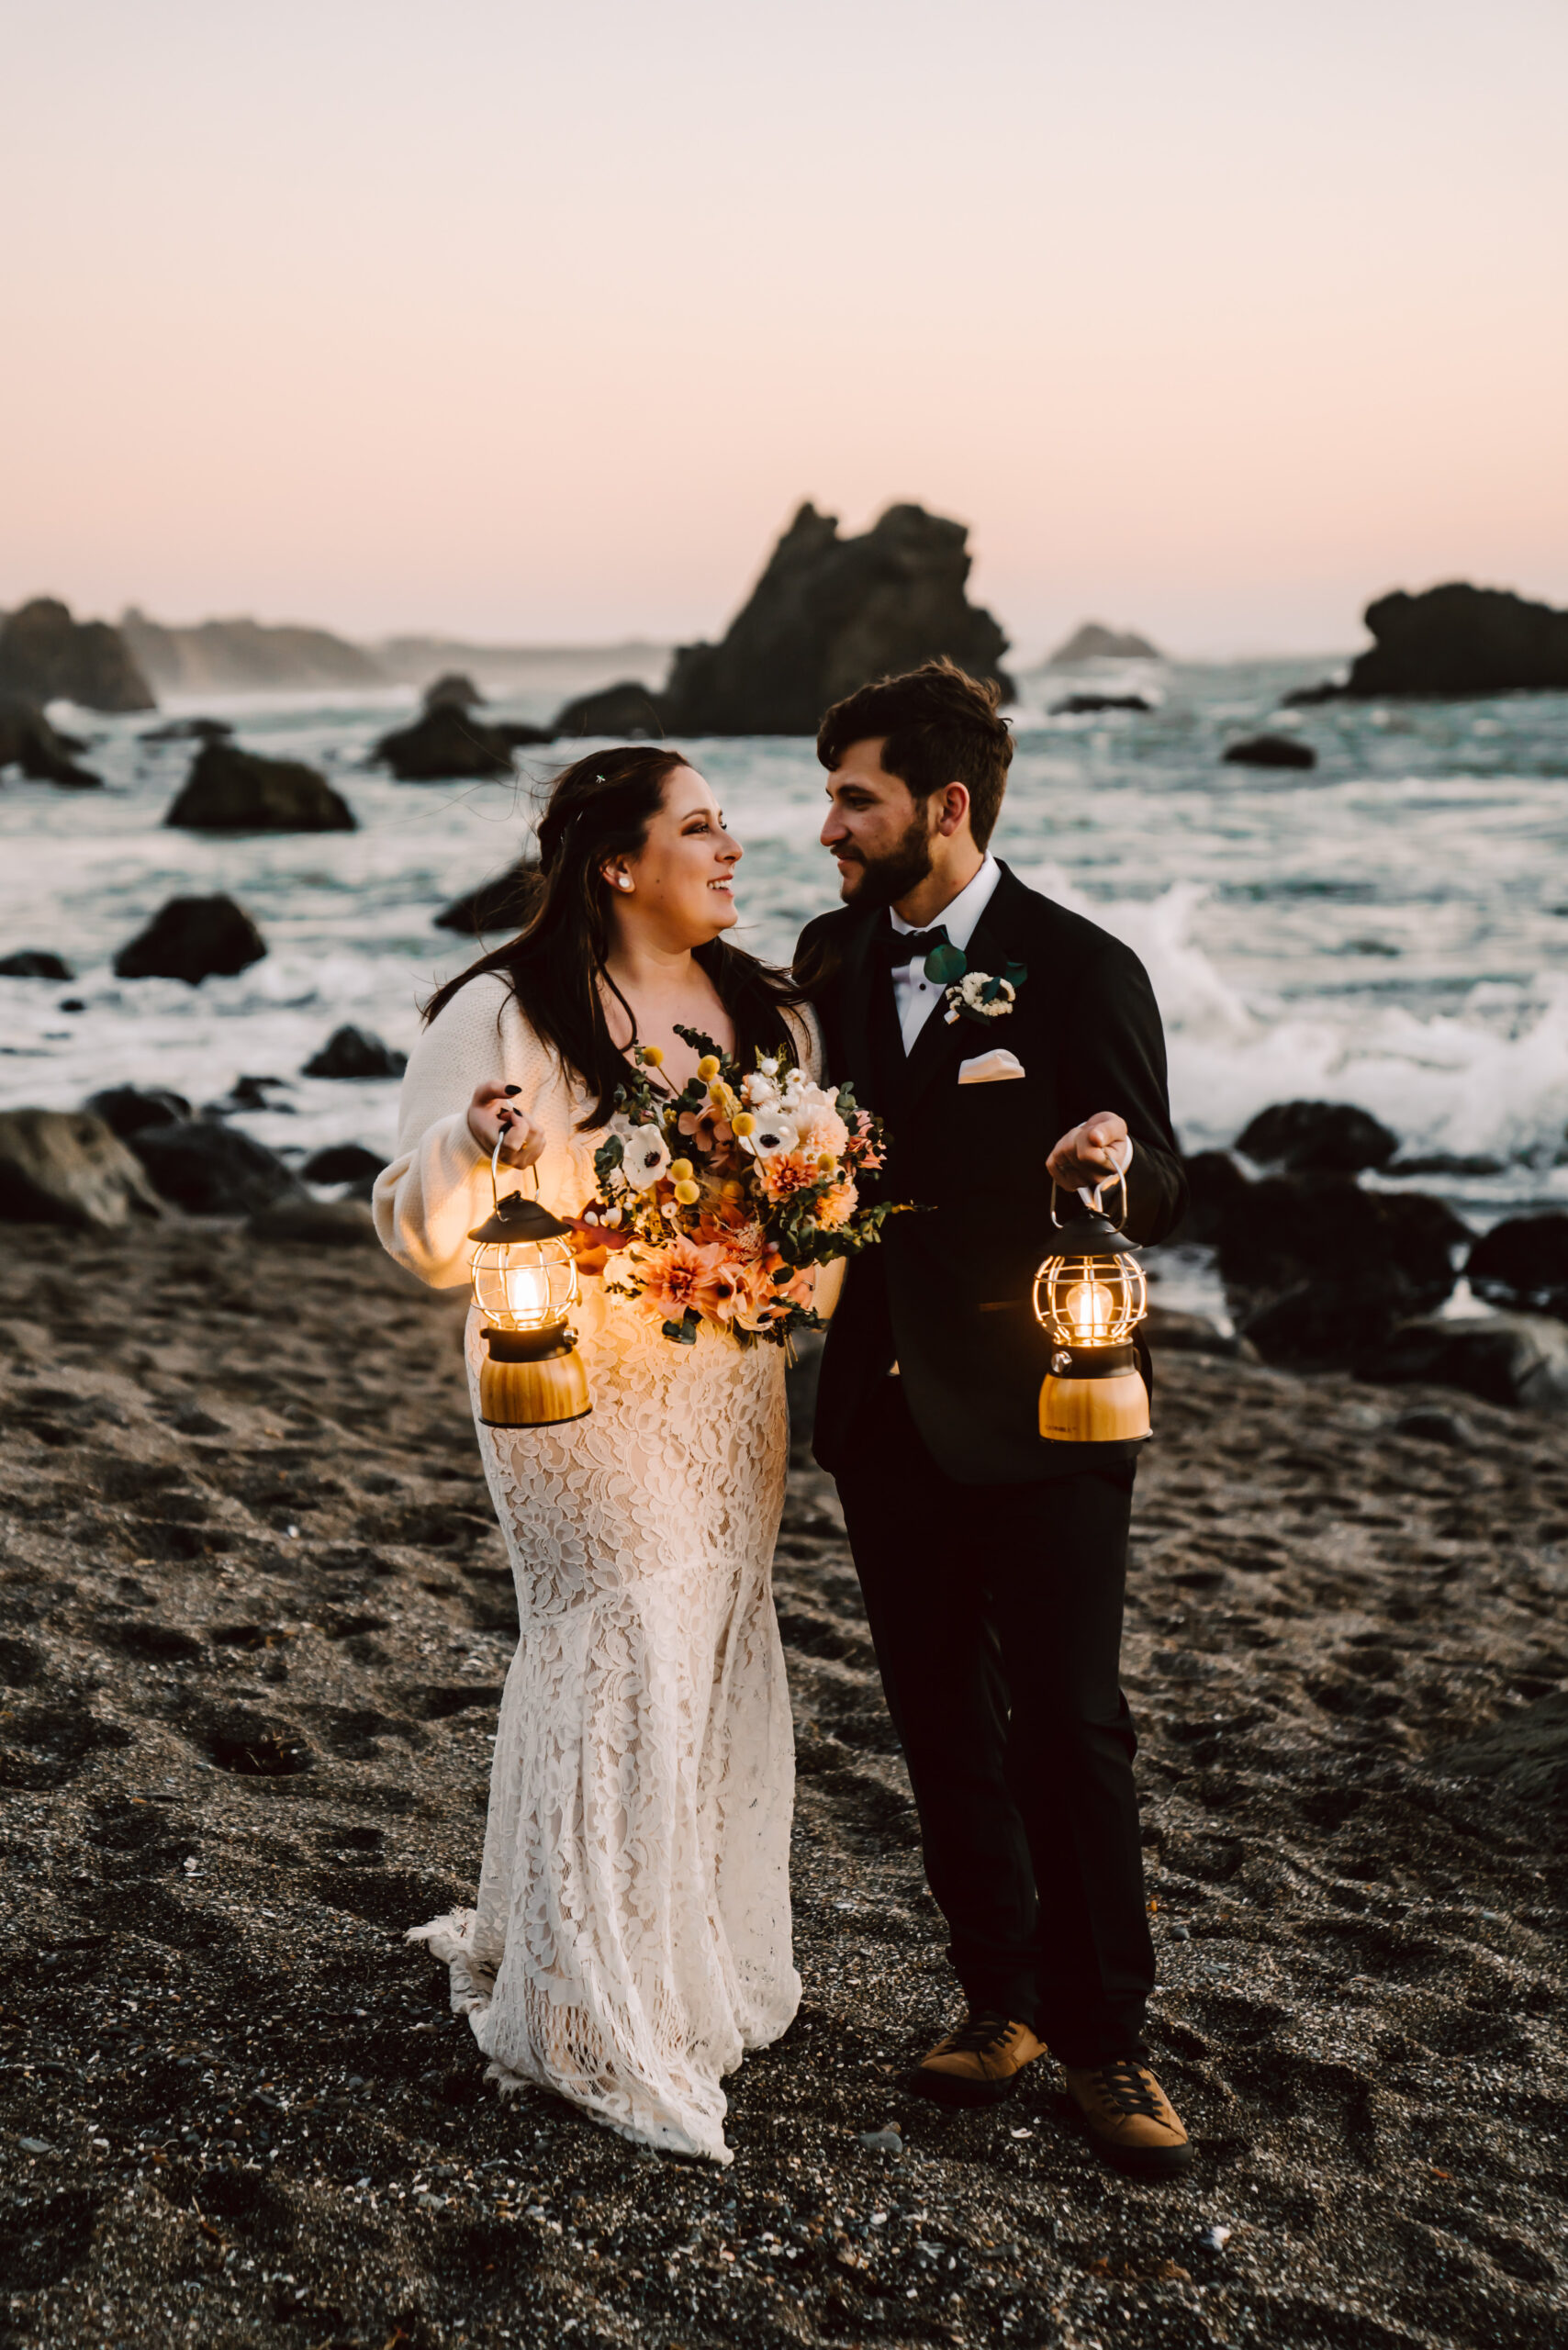 A bride and groom holding lanterns walking on the beach at sunset during their elopement day